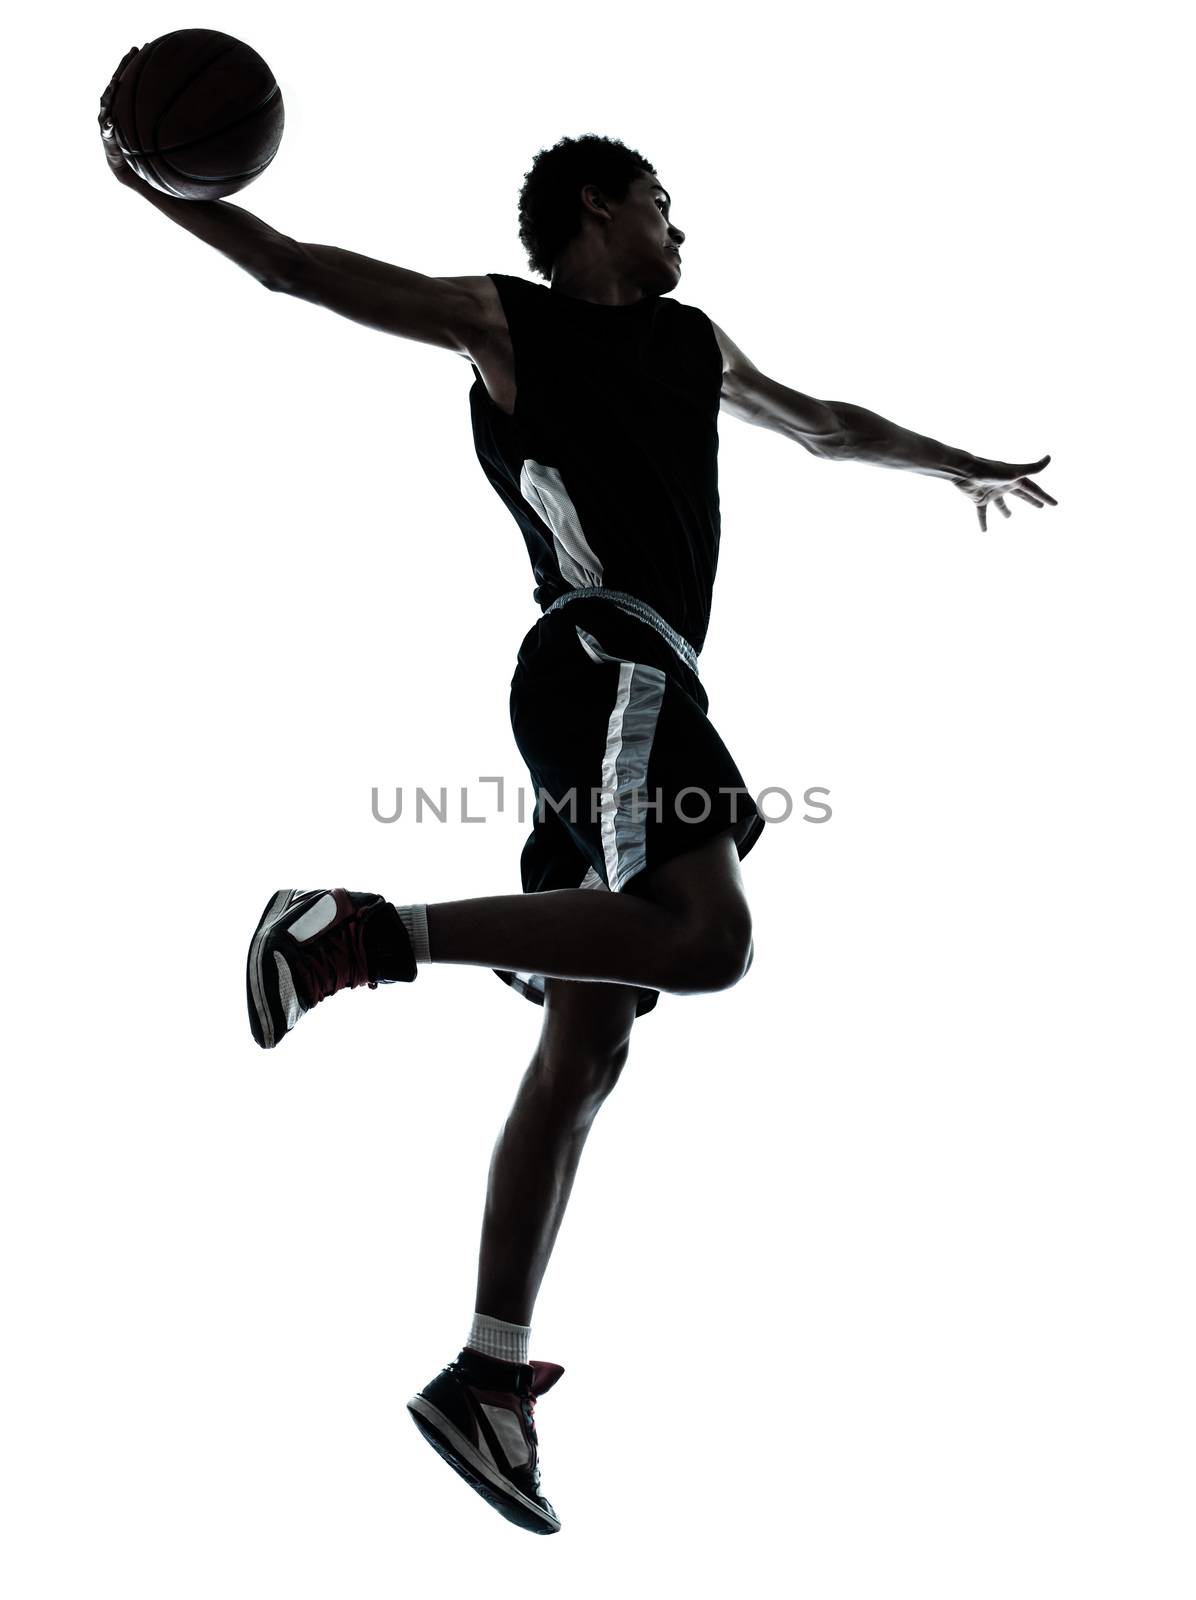 one young man basketball player one hand slam dunk silhouette in studio on white background